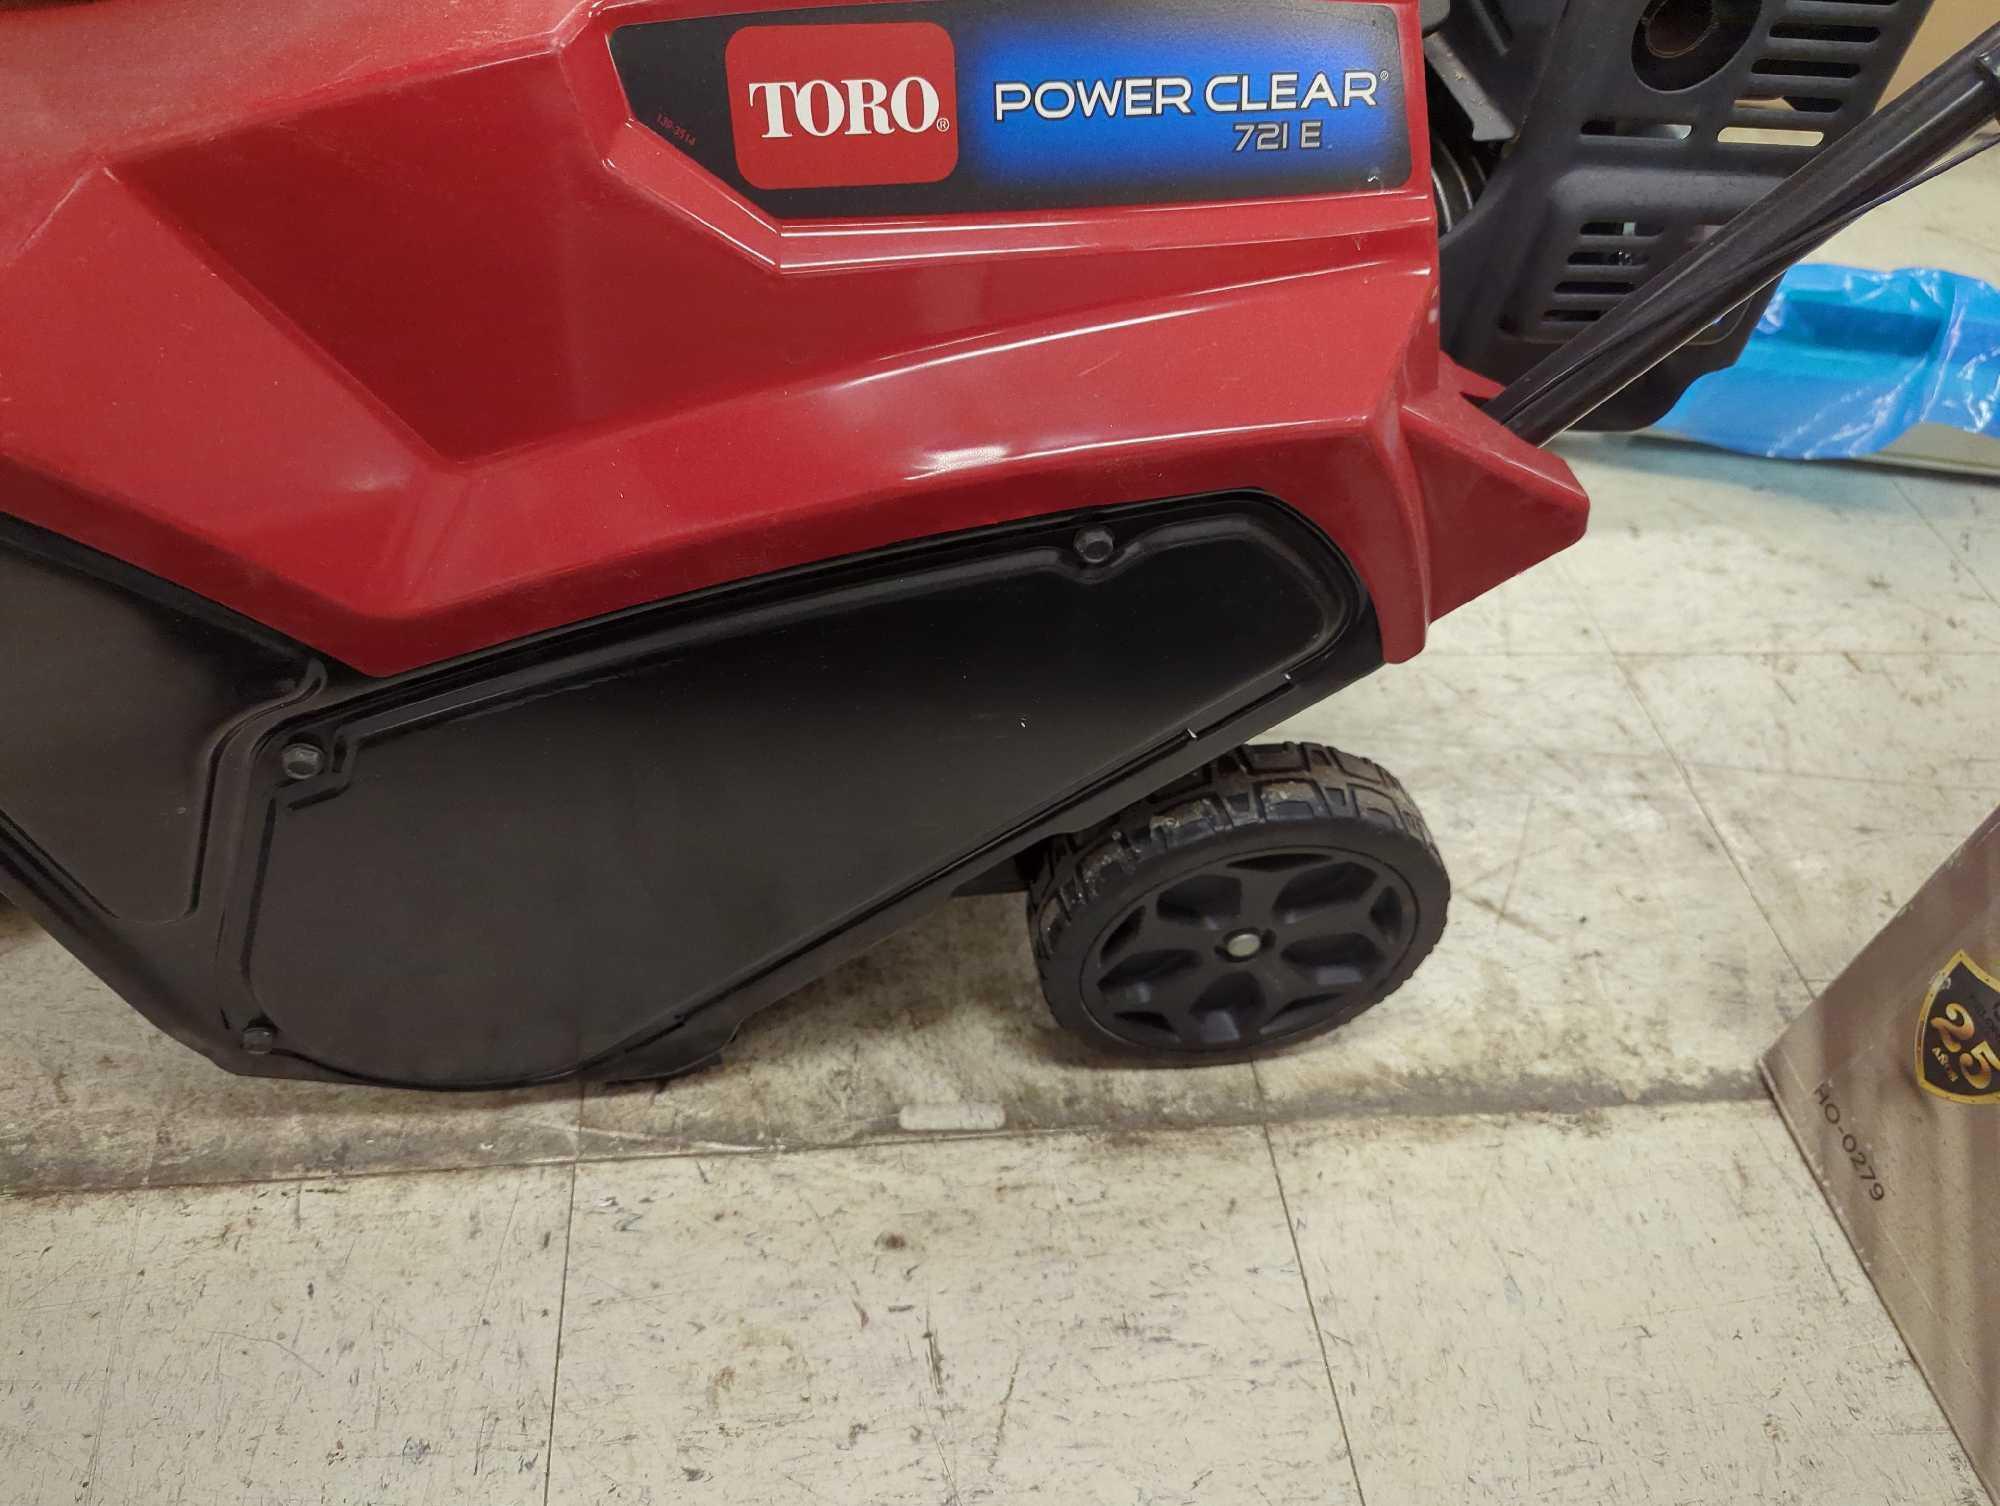 Toro Power Clear 721 E 21 in. 212 cc Single-Stage Self Propelled Electric Start Gas Snow Blower,